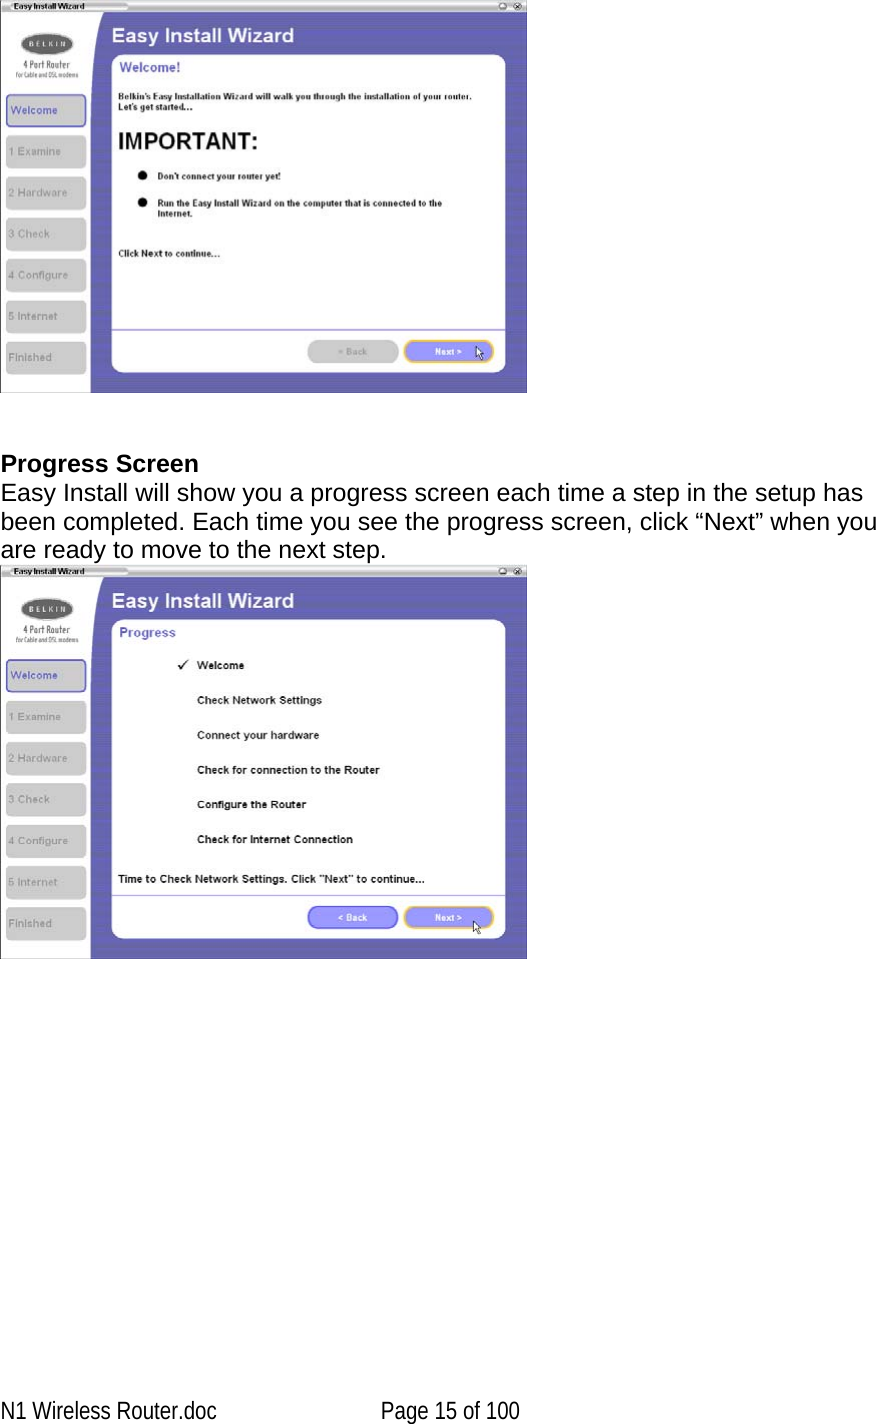      Progress Screen Easy Install will show you a progress screen each time a step in the setup has been completed. Each time you see the progress screen, click “Next” when you are ready to move to the next step.    N1 Wireless Router.doc  Page 15 of 100 